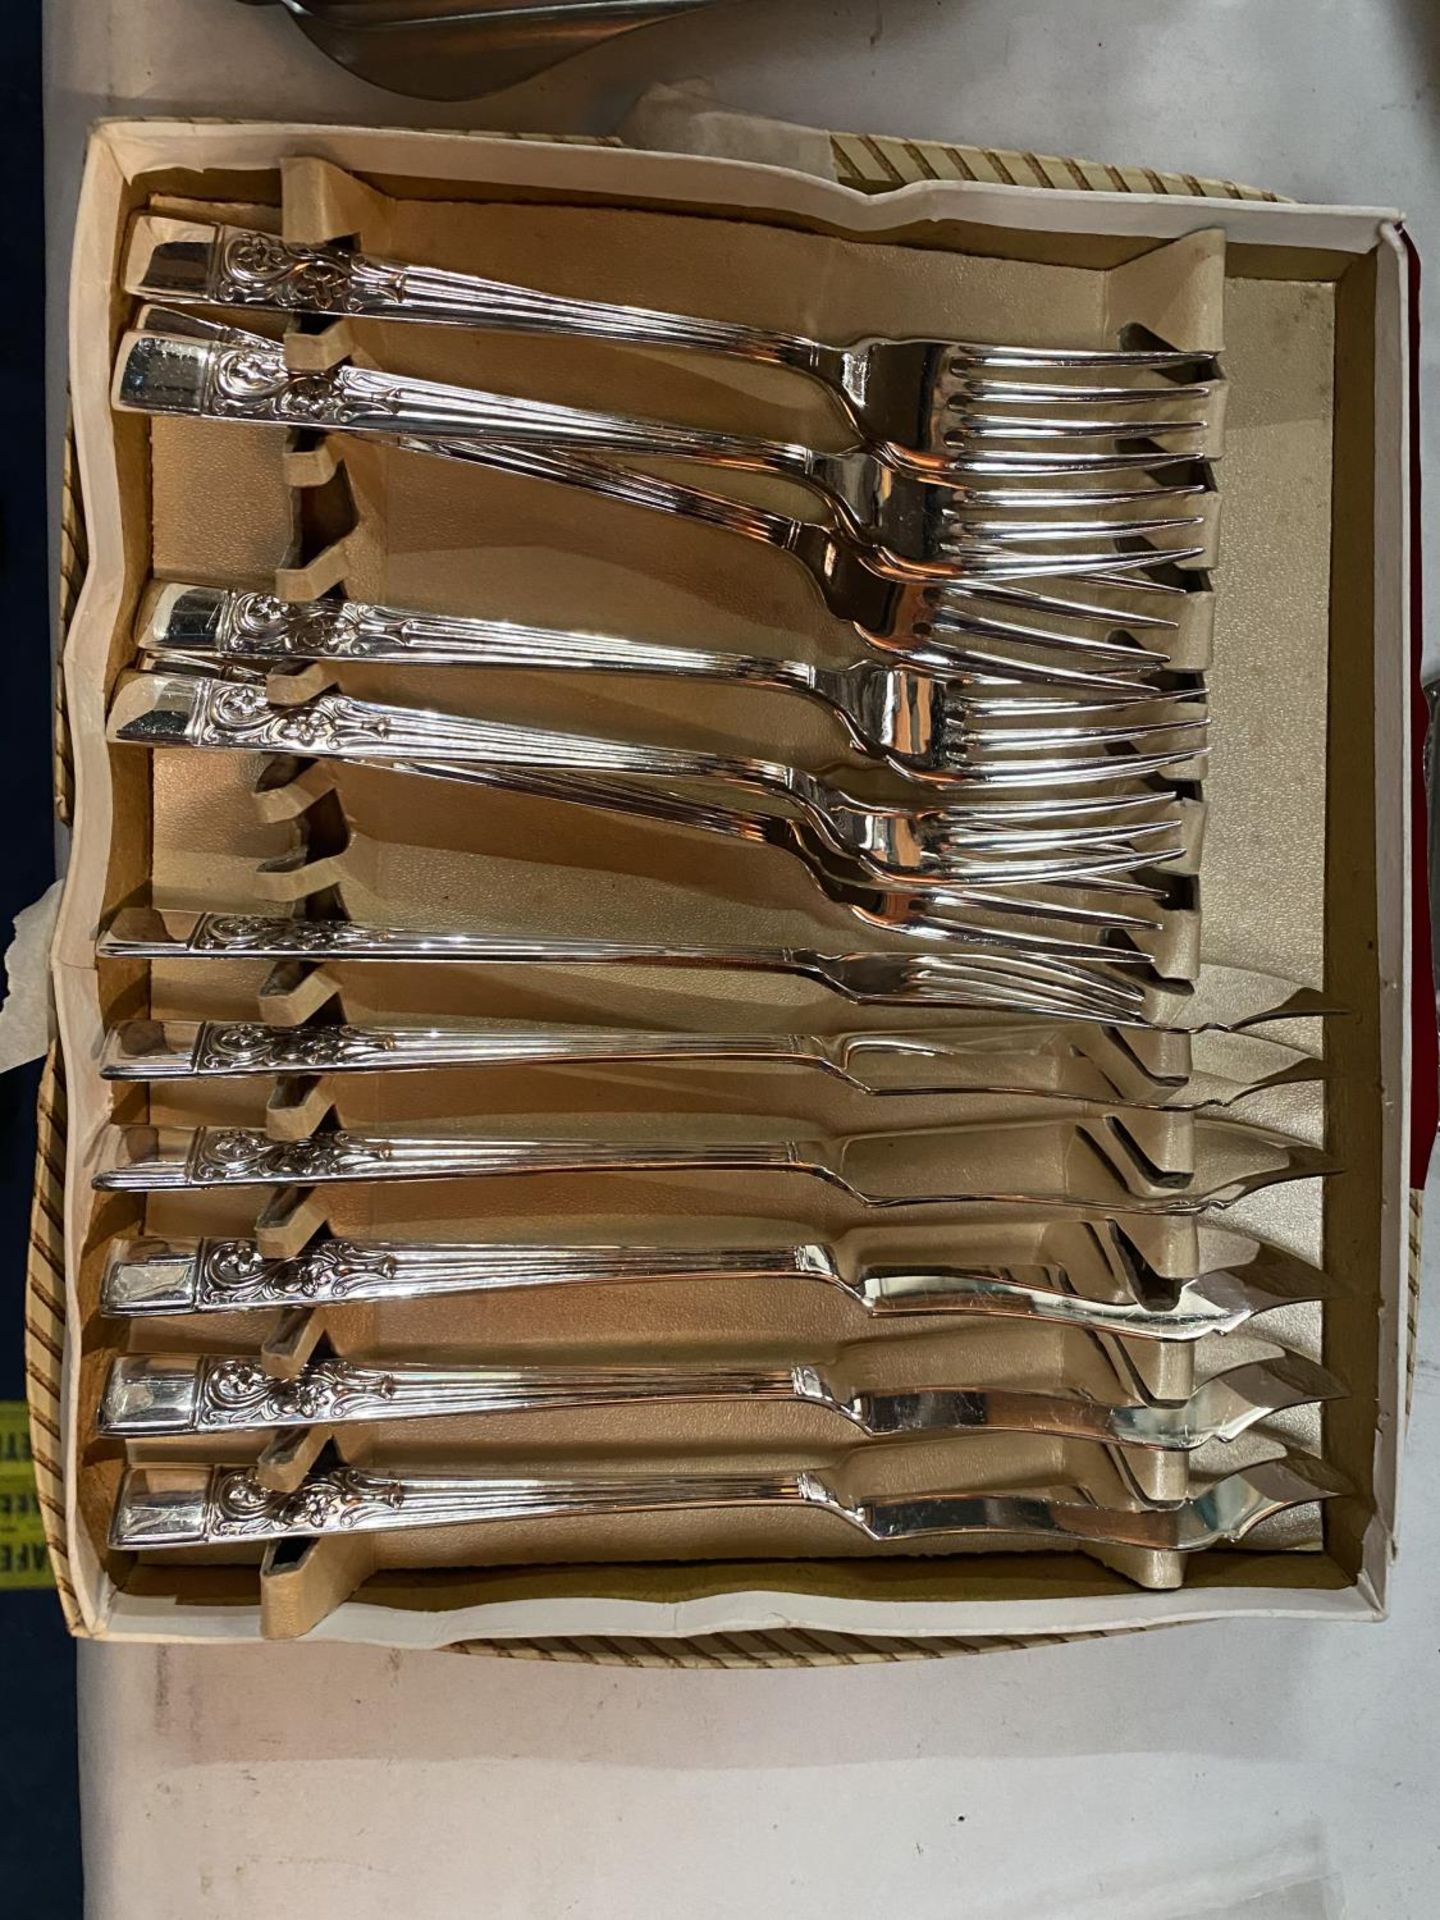 A COLLECTION OF STAINLESS STEEL DECORATIVE PLATES, EGG CUPS ON A TRAY, TOAST RACK , CUTLERY - Image 6 of 8